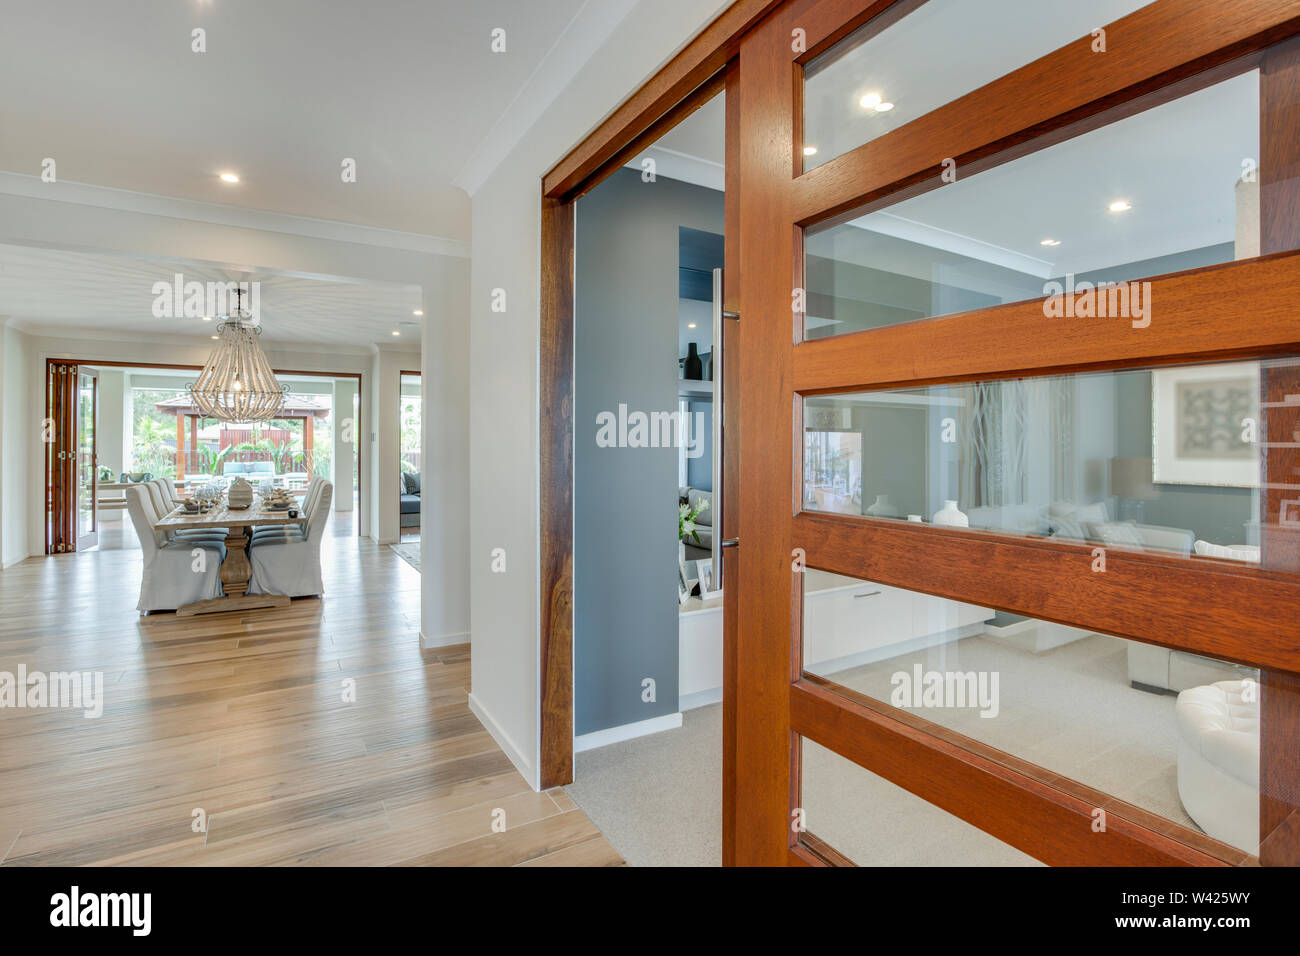 A Stylish Glass Door With Wooden Frame Giving Entrance To A